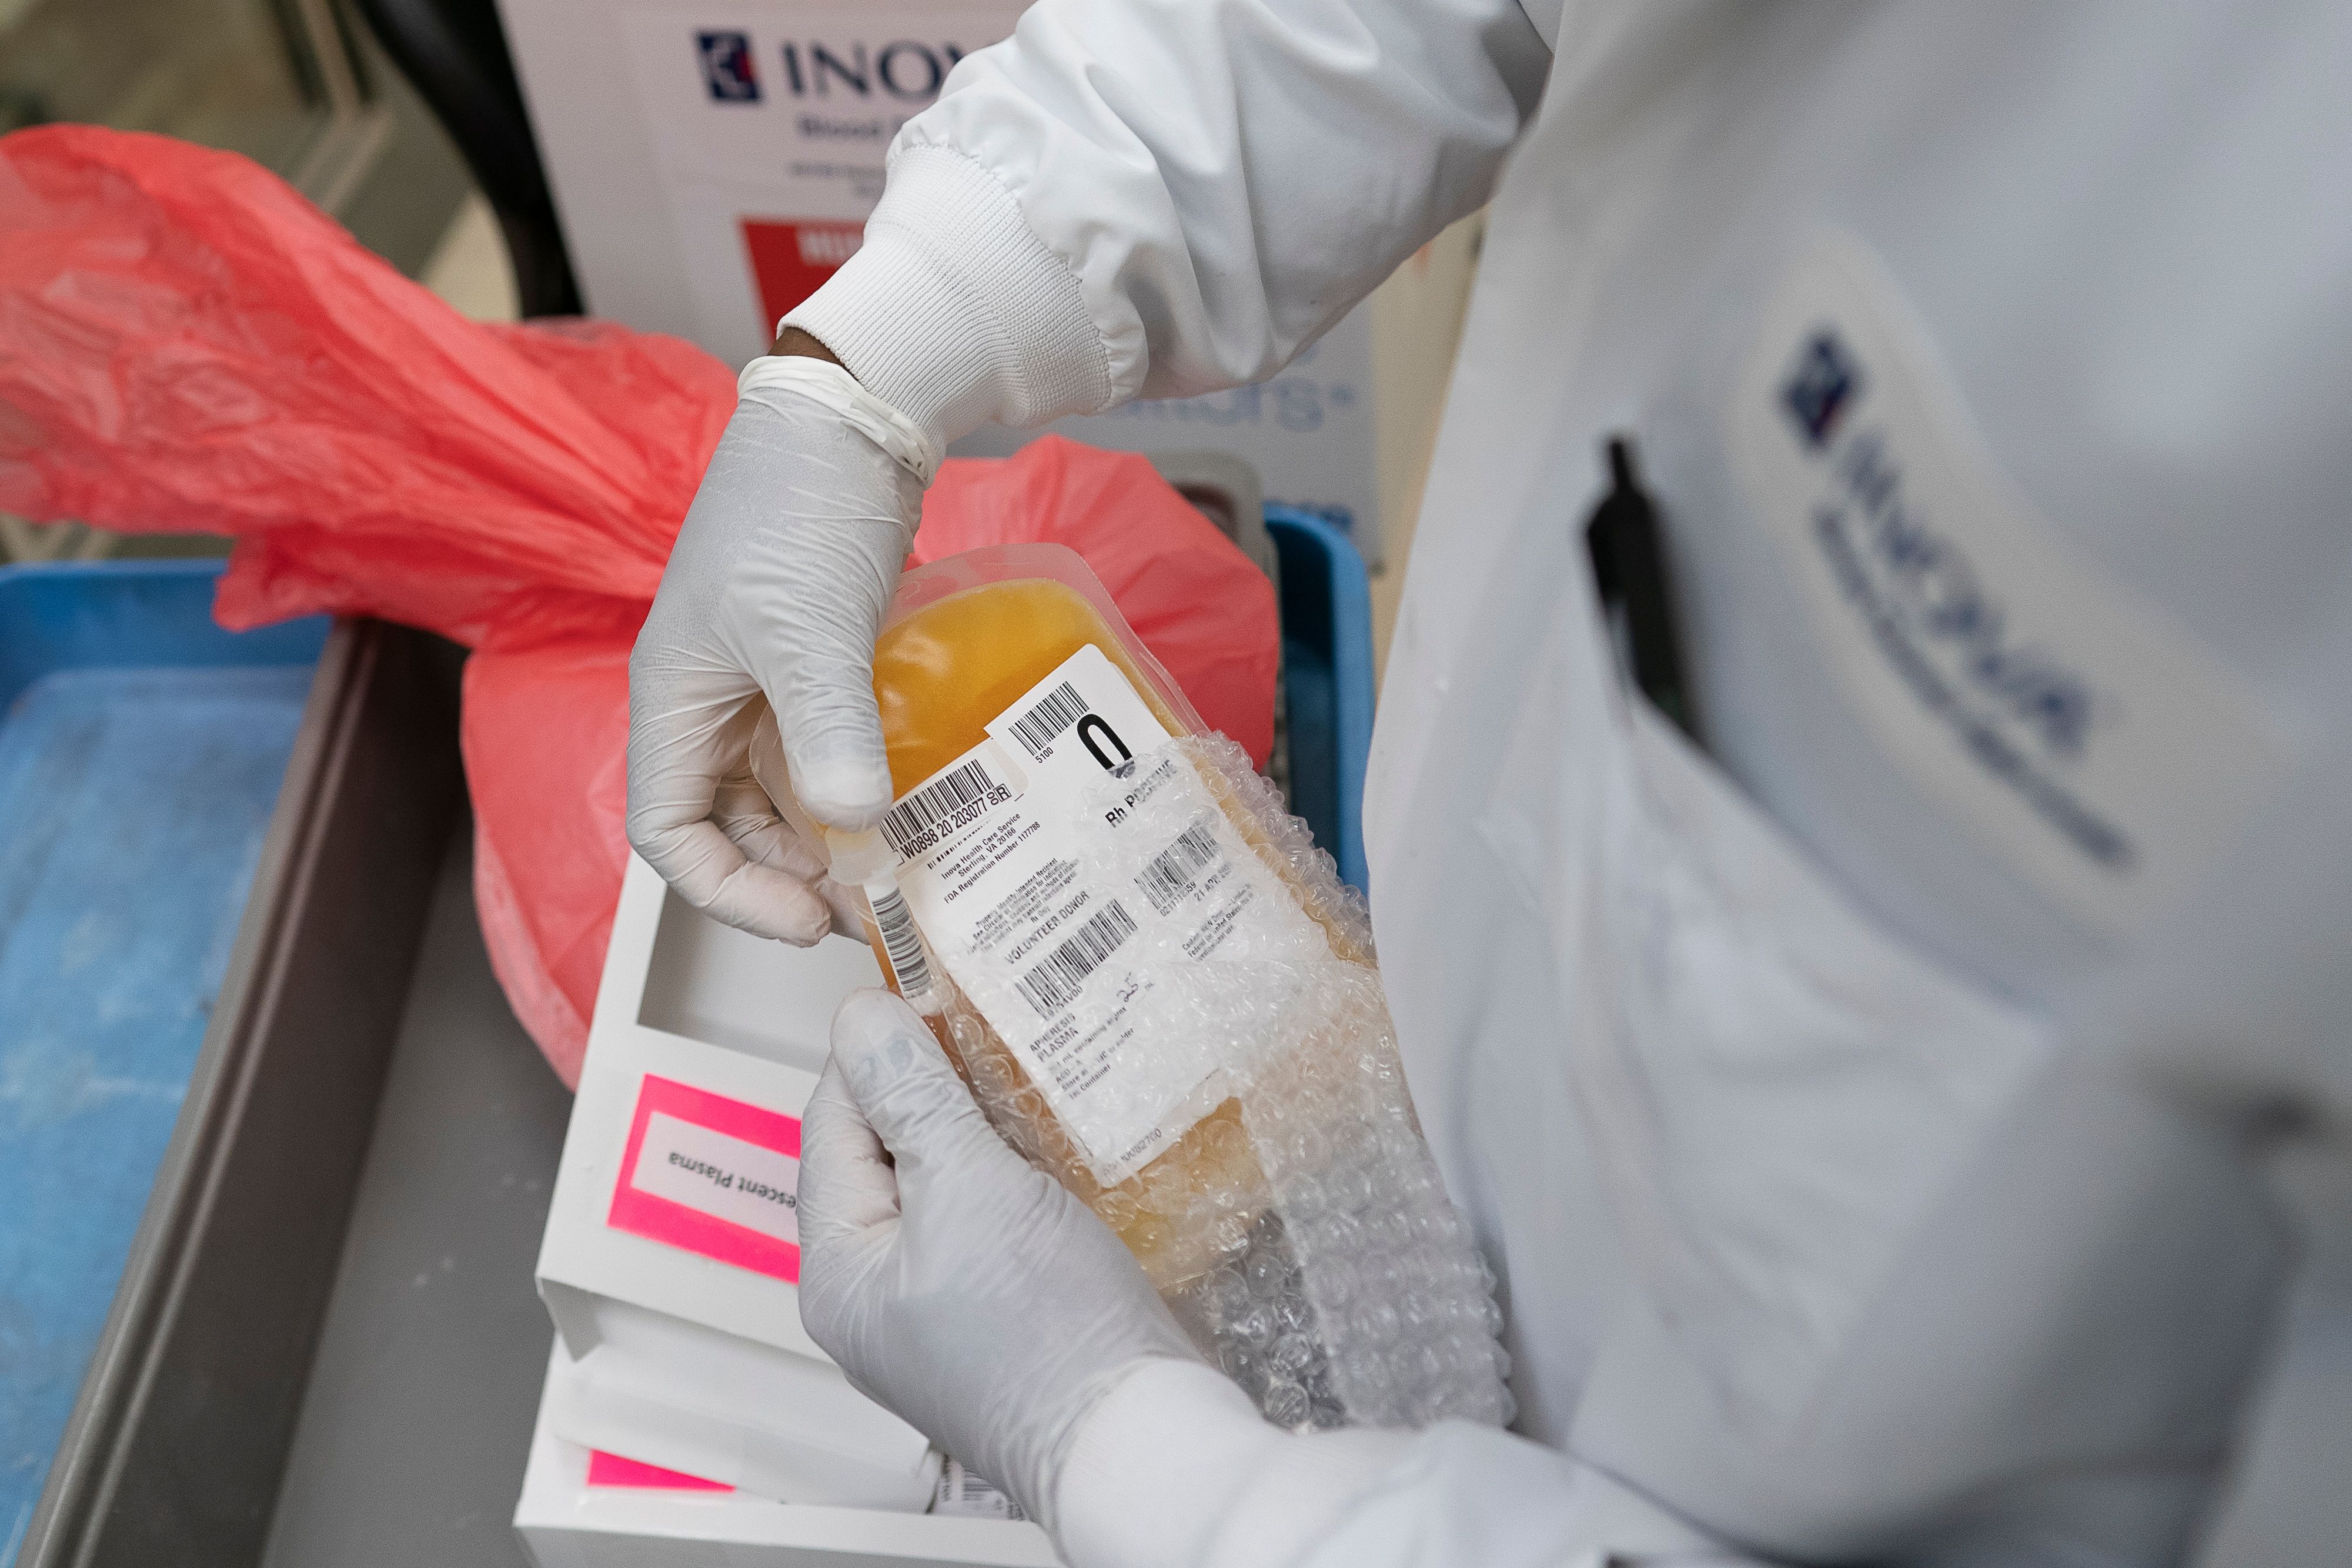 A lab technician packs donated convalescent plasma donated by recovered Covid-19 patients for shipping to local hospitals at Inova Blood Services on April 22 in Dulles, Virginia.